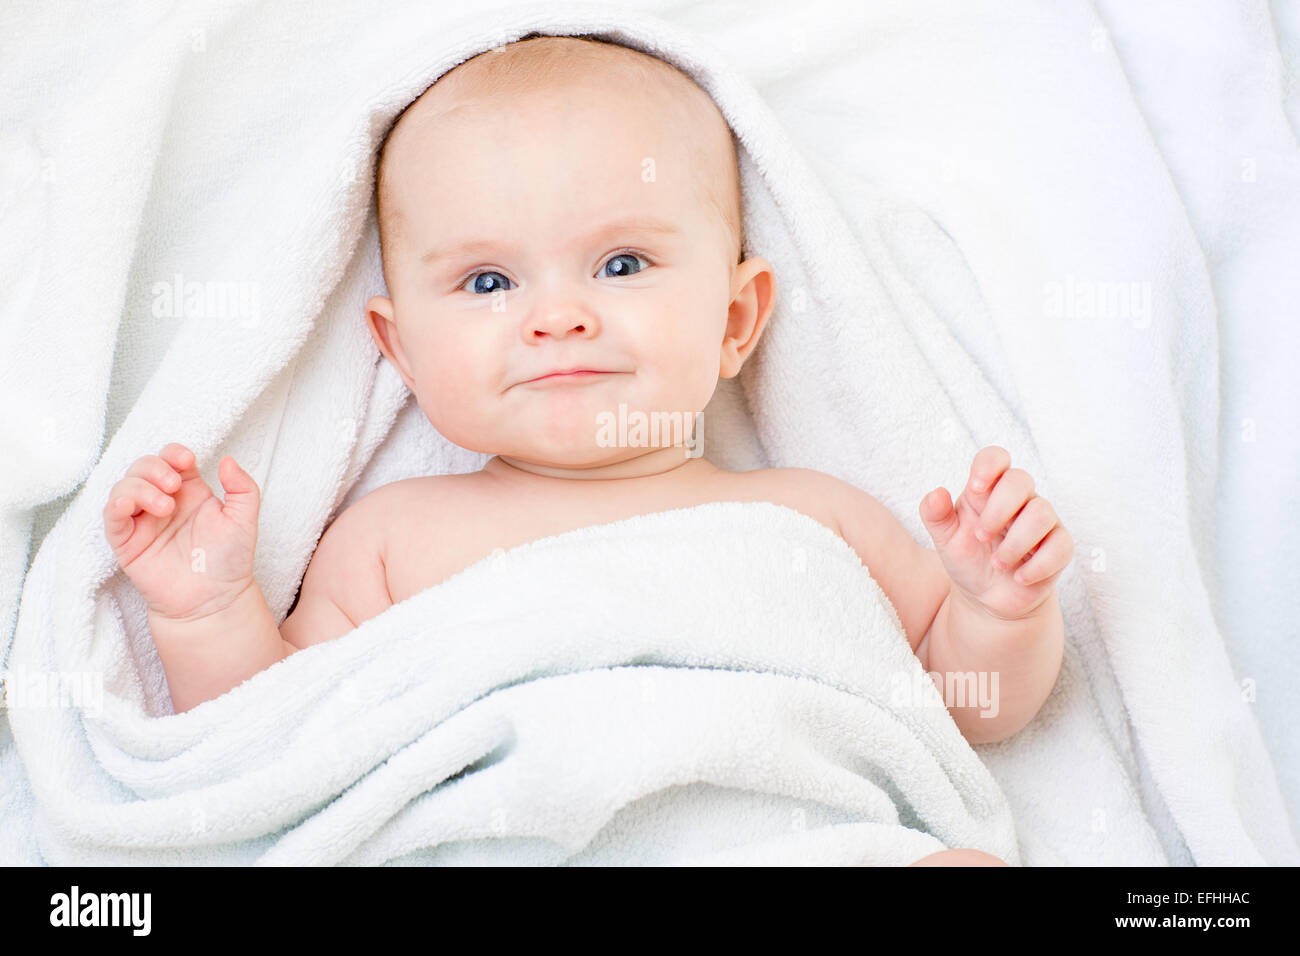 Cute smiling baby girl lying on white towel Stock Photo